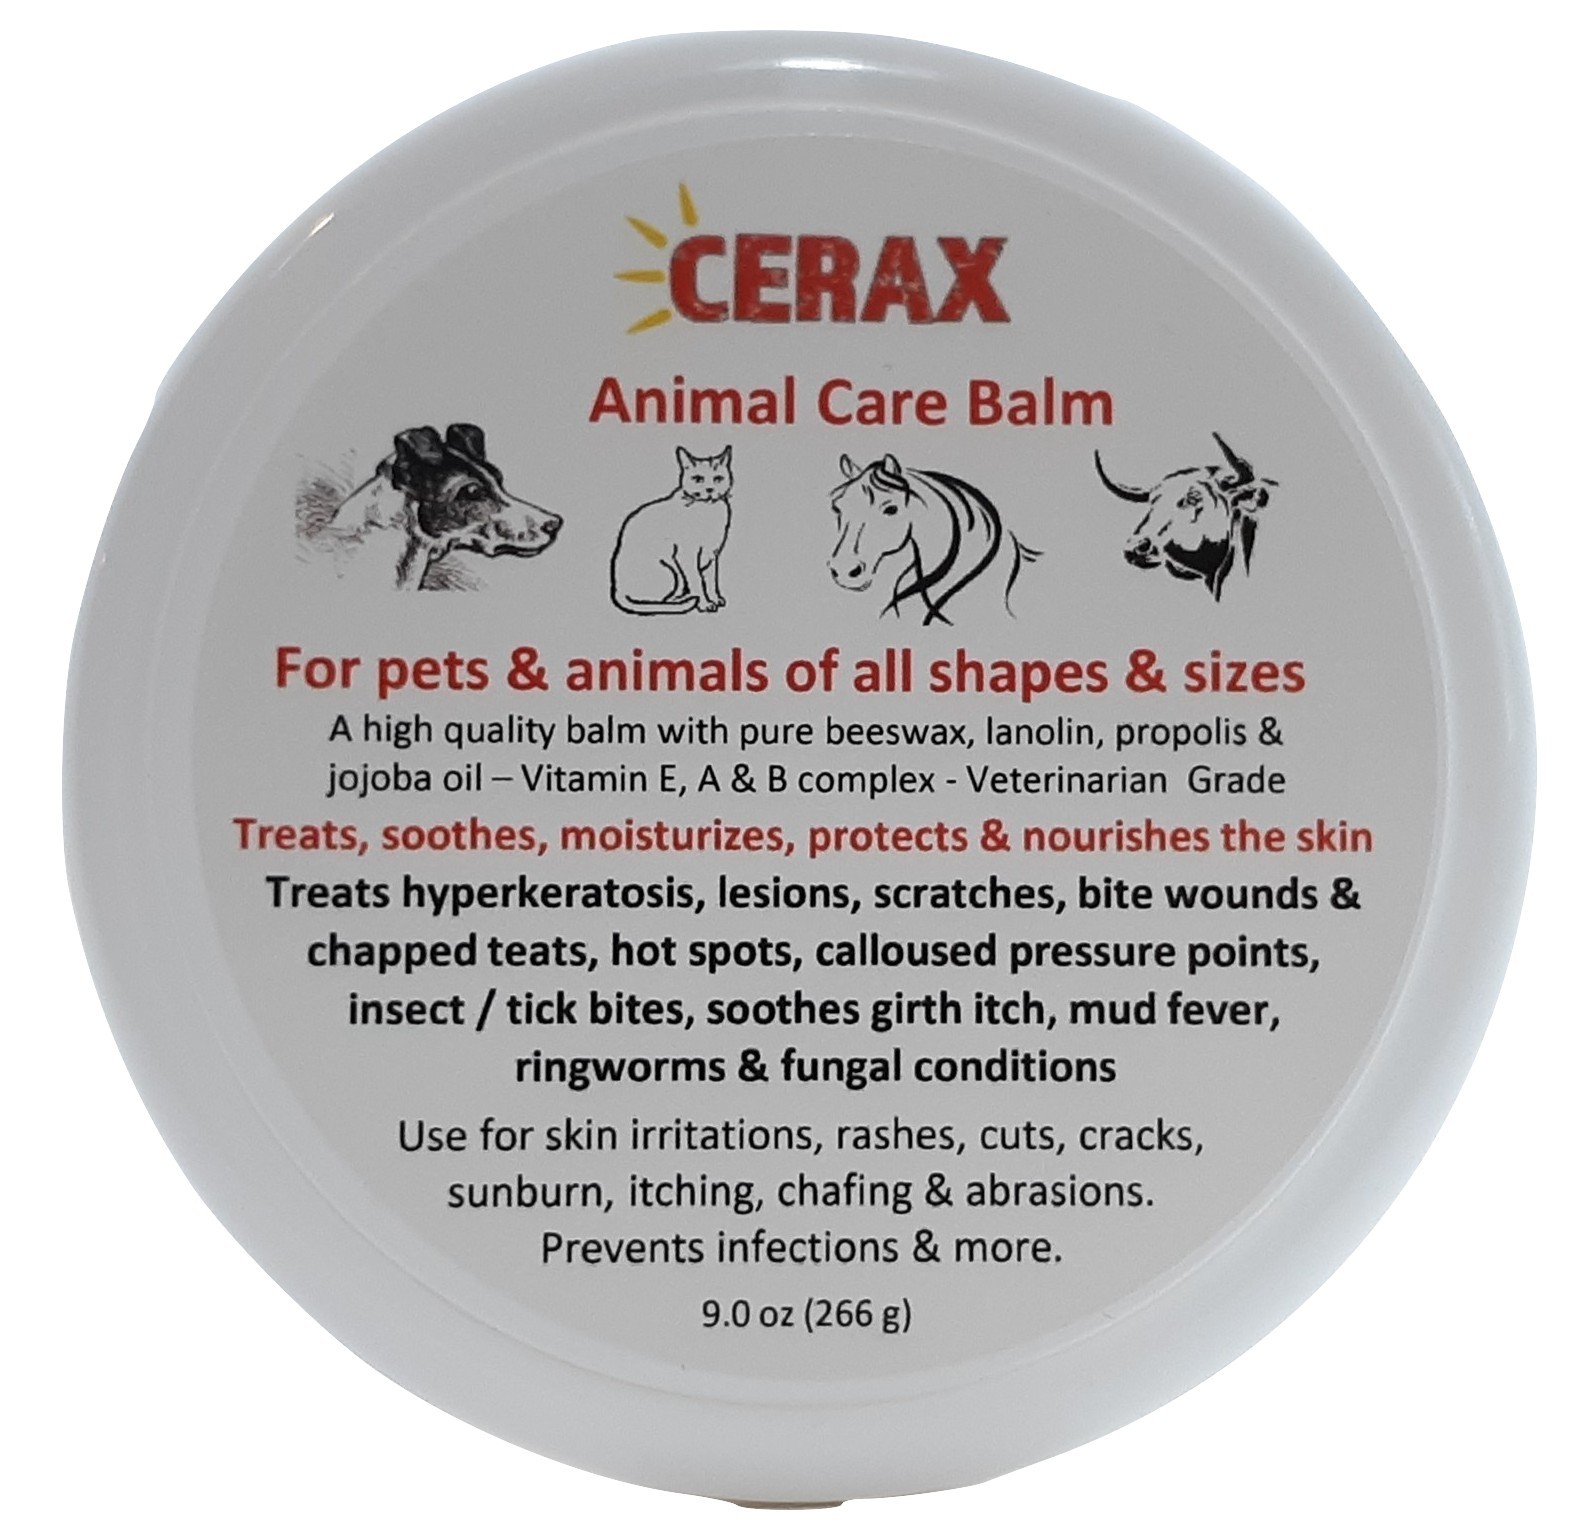 CERAX Animal Care Balm - promotes healing, protects and nouishes the skin